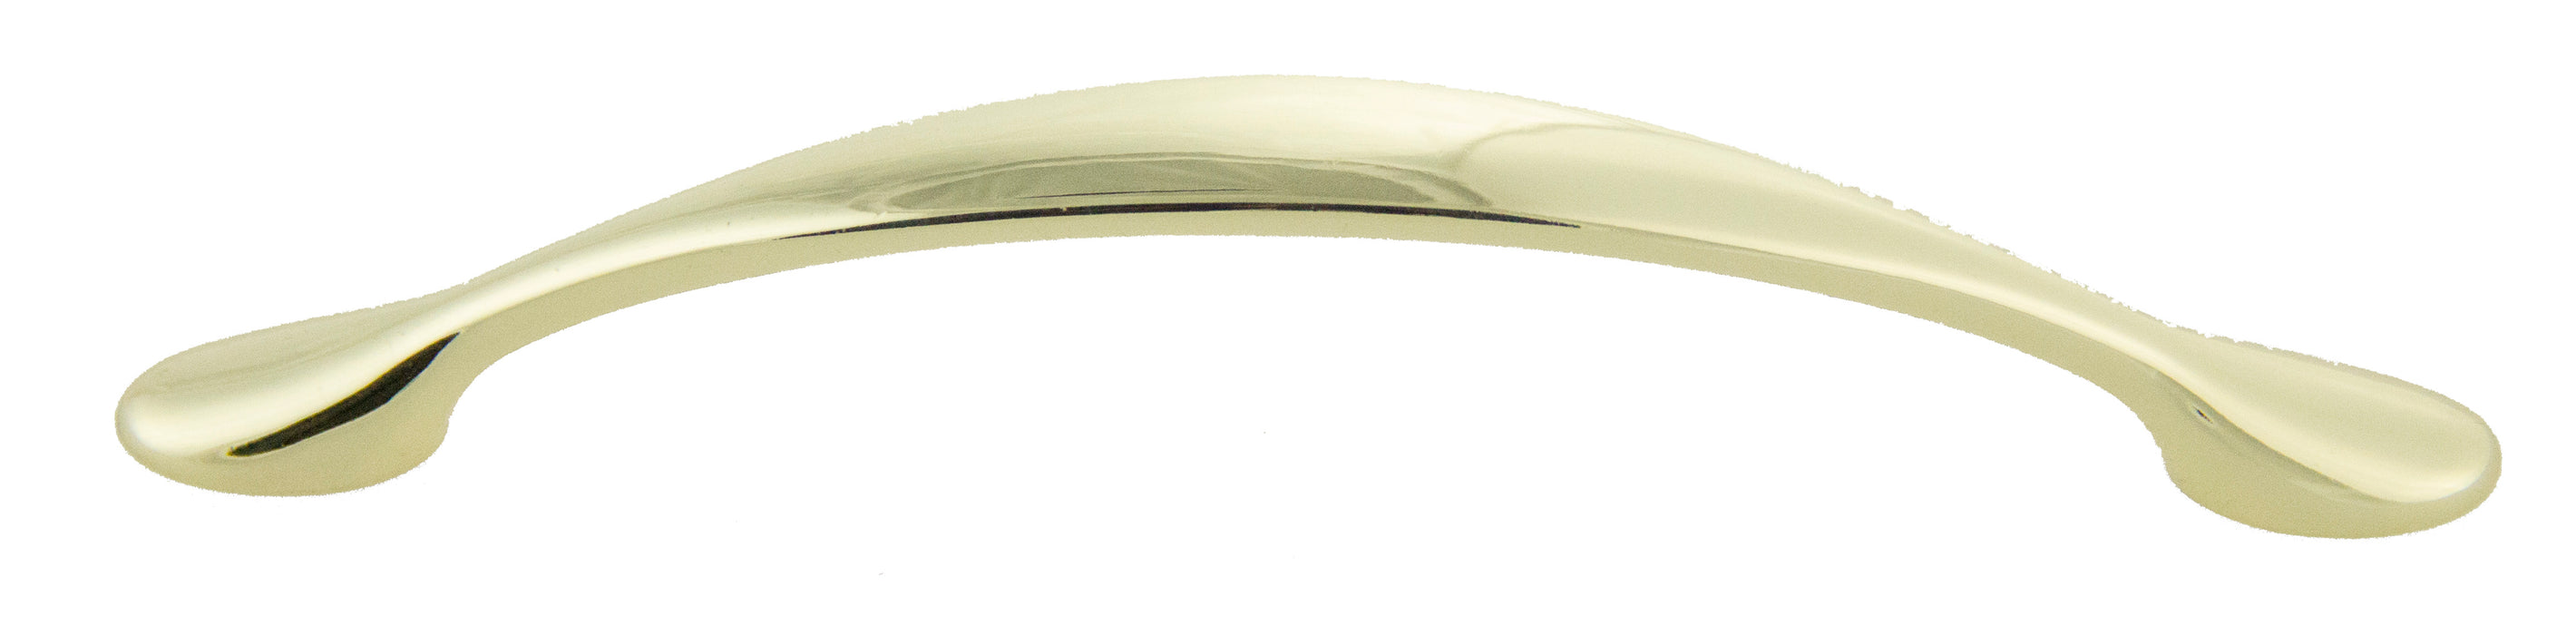 Andrew Claire Collection 5" Decorative Pull Polished Brass (AC-80815.PB)